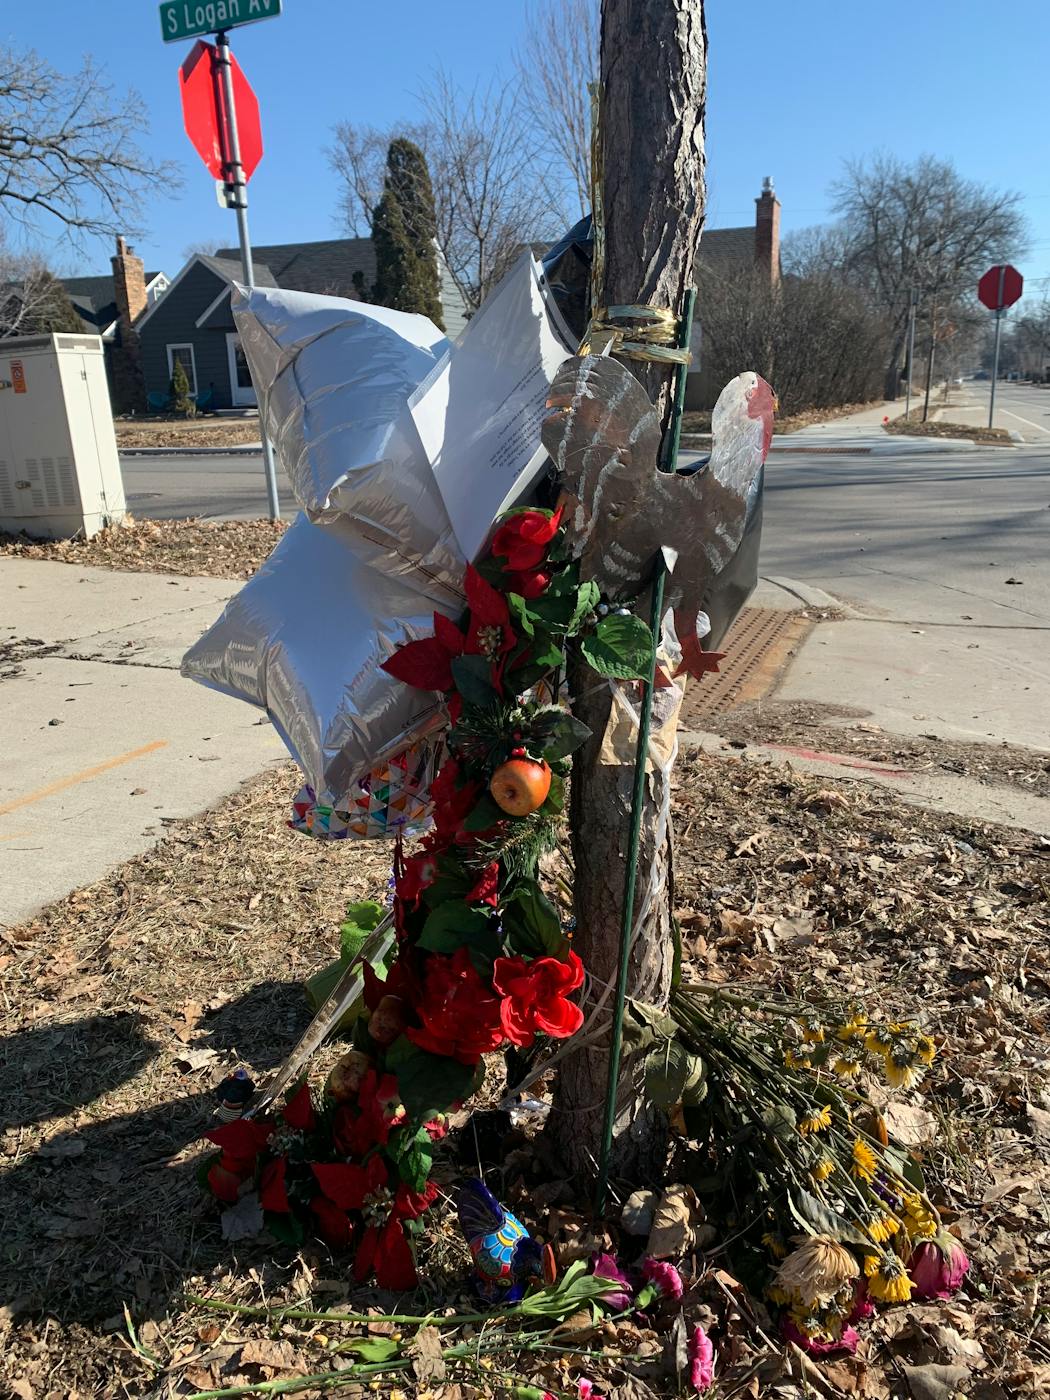 A memorial for a beloved neighborhood turkey at 54th St. and Logan Ave. in south Minneapolis included love notes and an original poem.